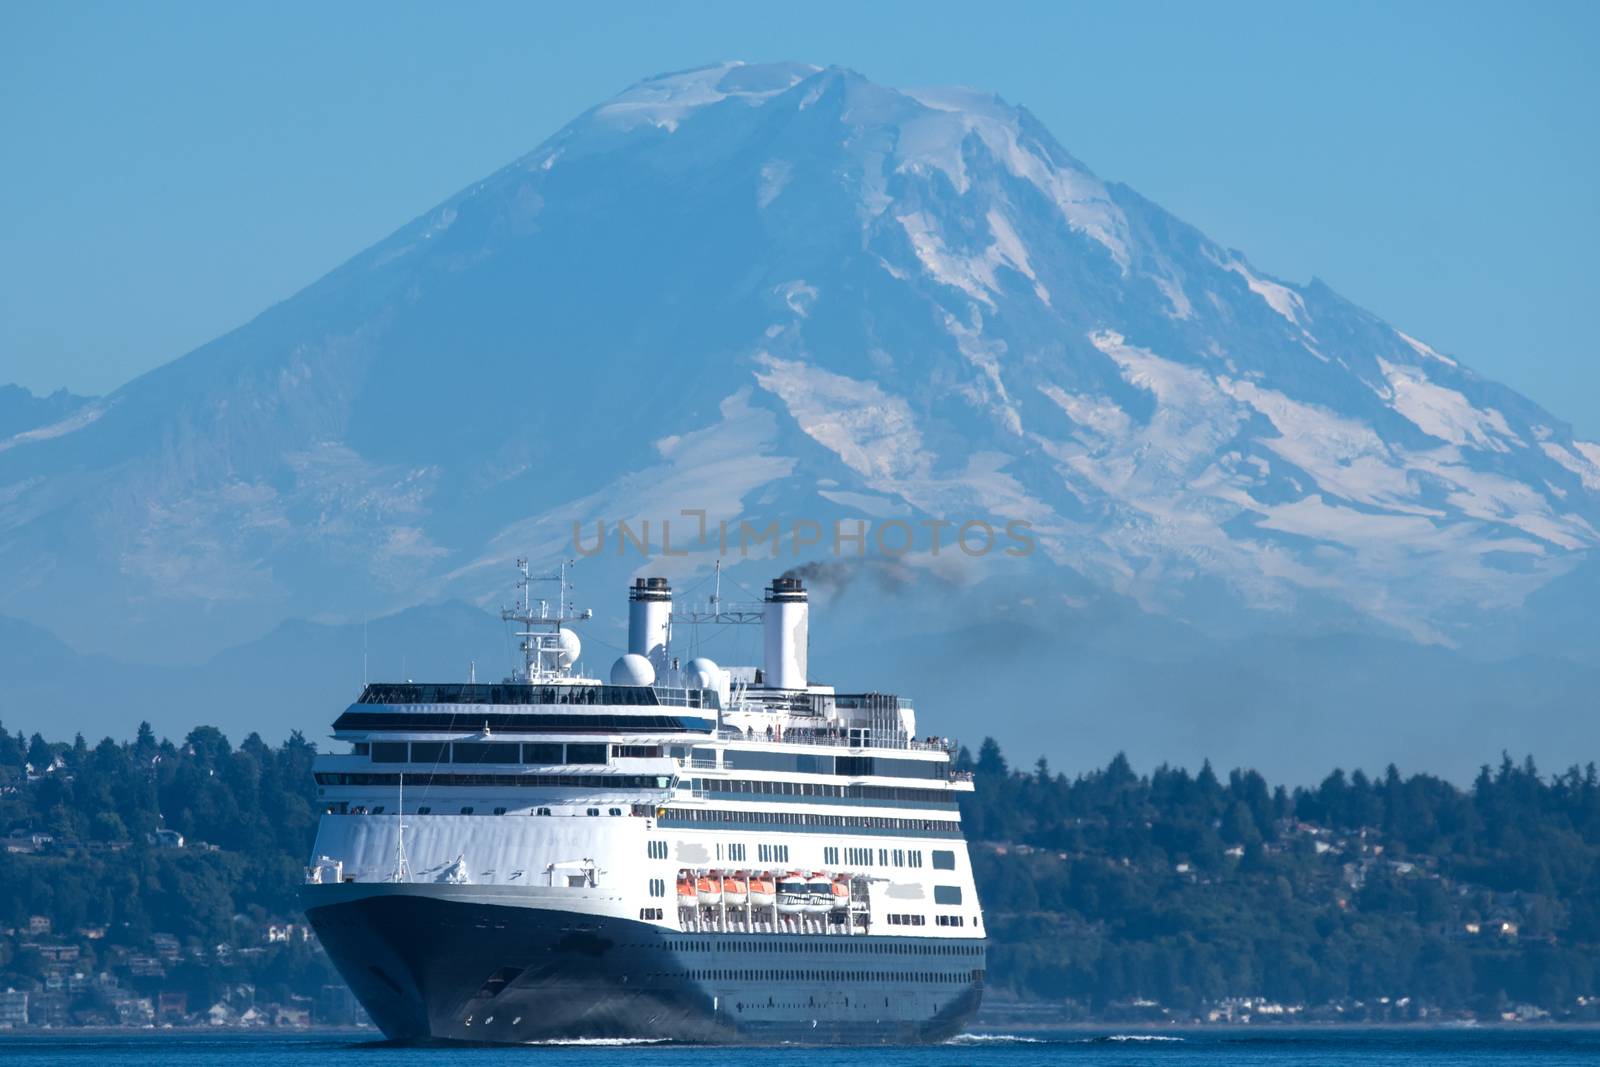 Holland America Line's M/V Amsterdam leaving Seattle on her way to Alaska with Mount Rainier in the background.